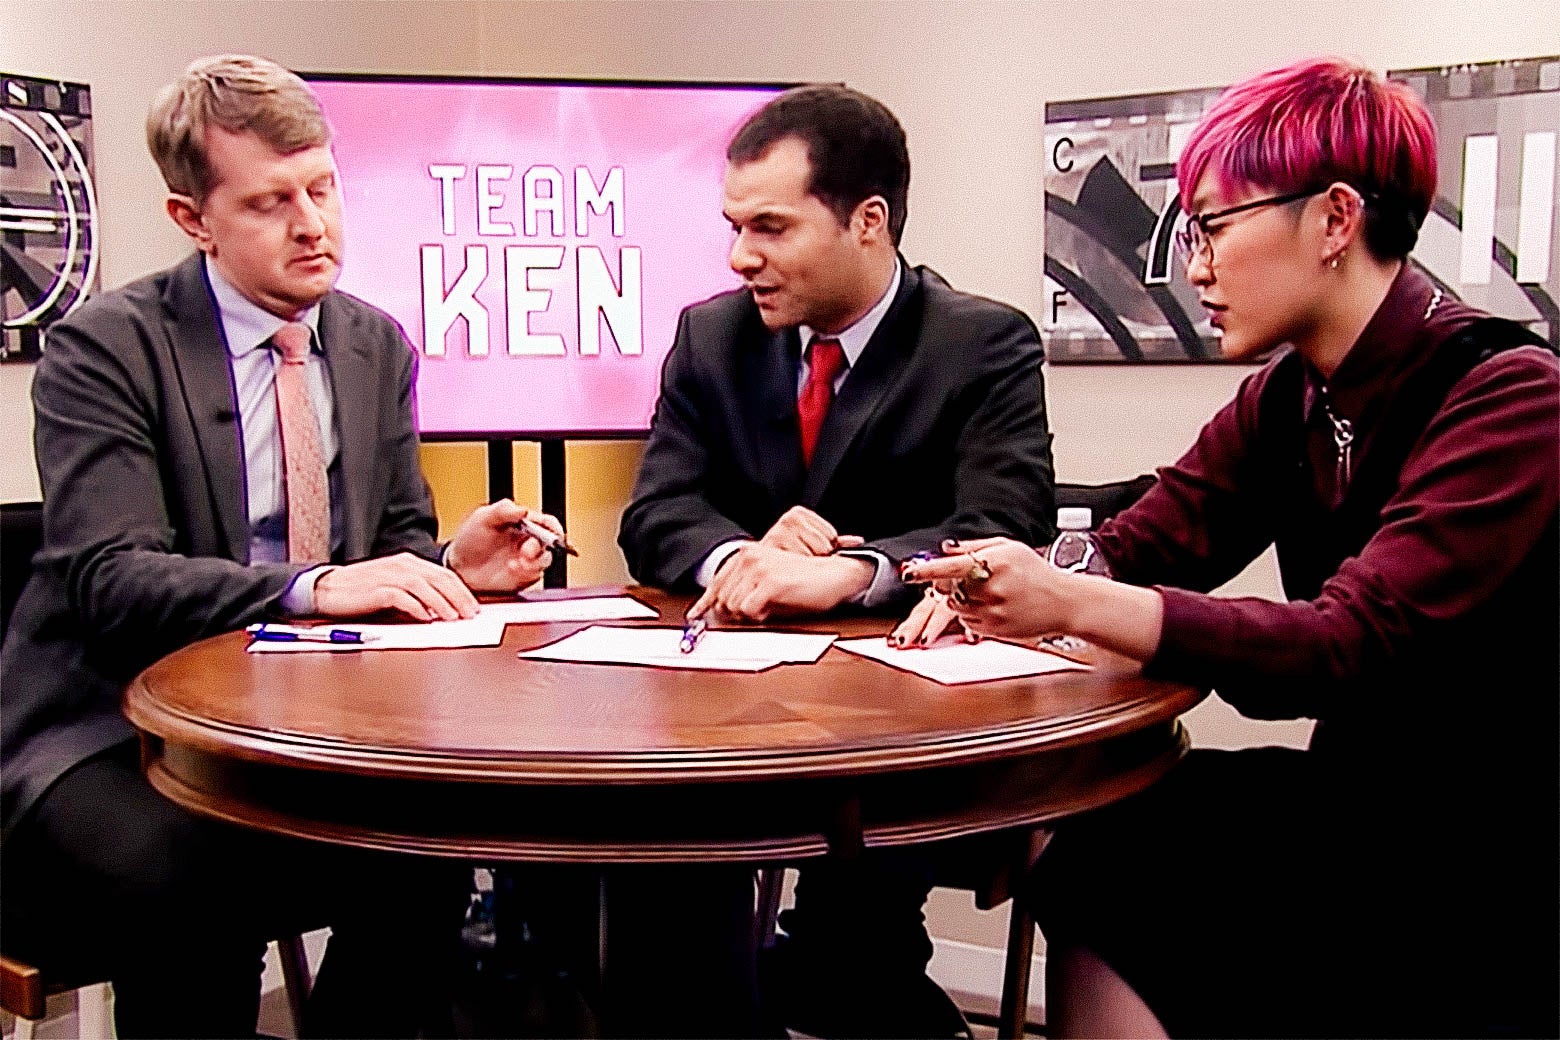 Ken Jennings, Matt Jackson, and Monica Thieu conferring at a round table. A TV screen in the background reads "TEAM KEN."